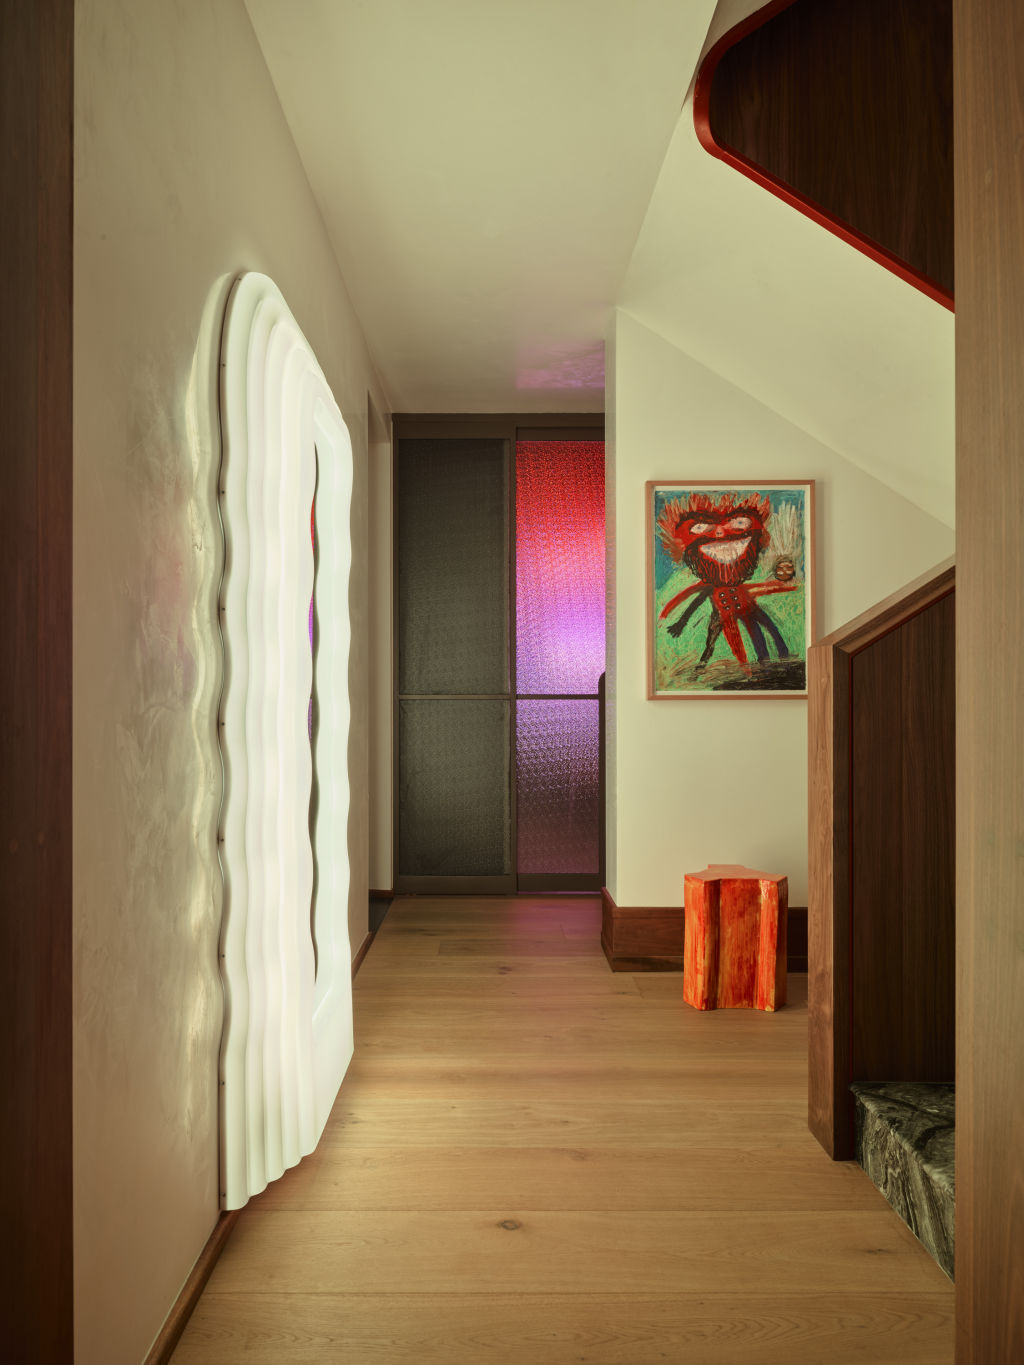 Every room pops with colour, and colourful art. Photo: Anson Smart